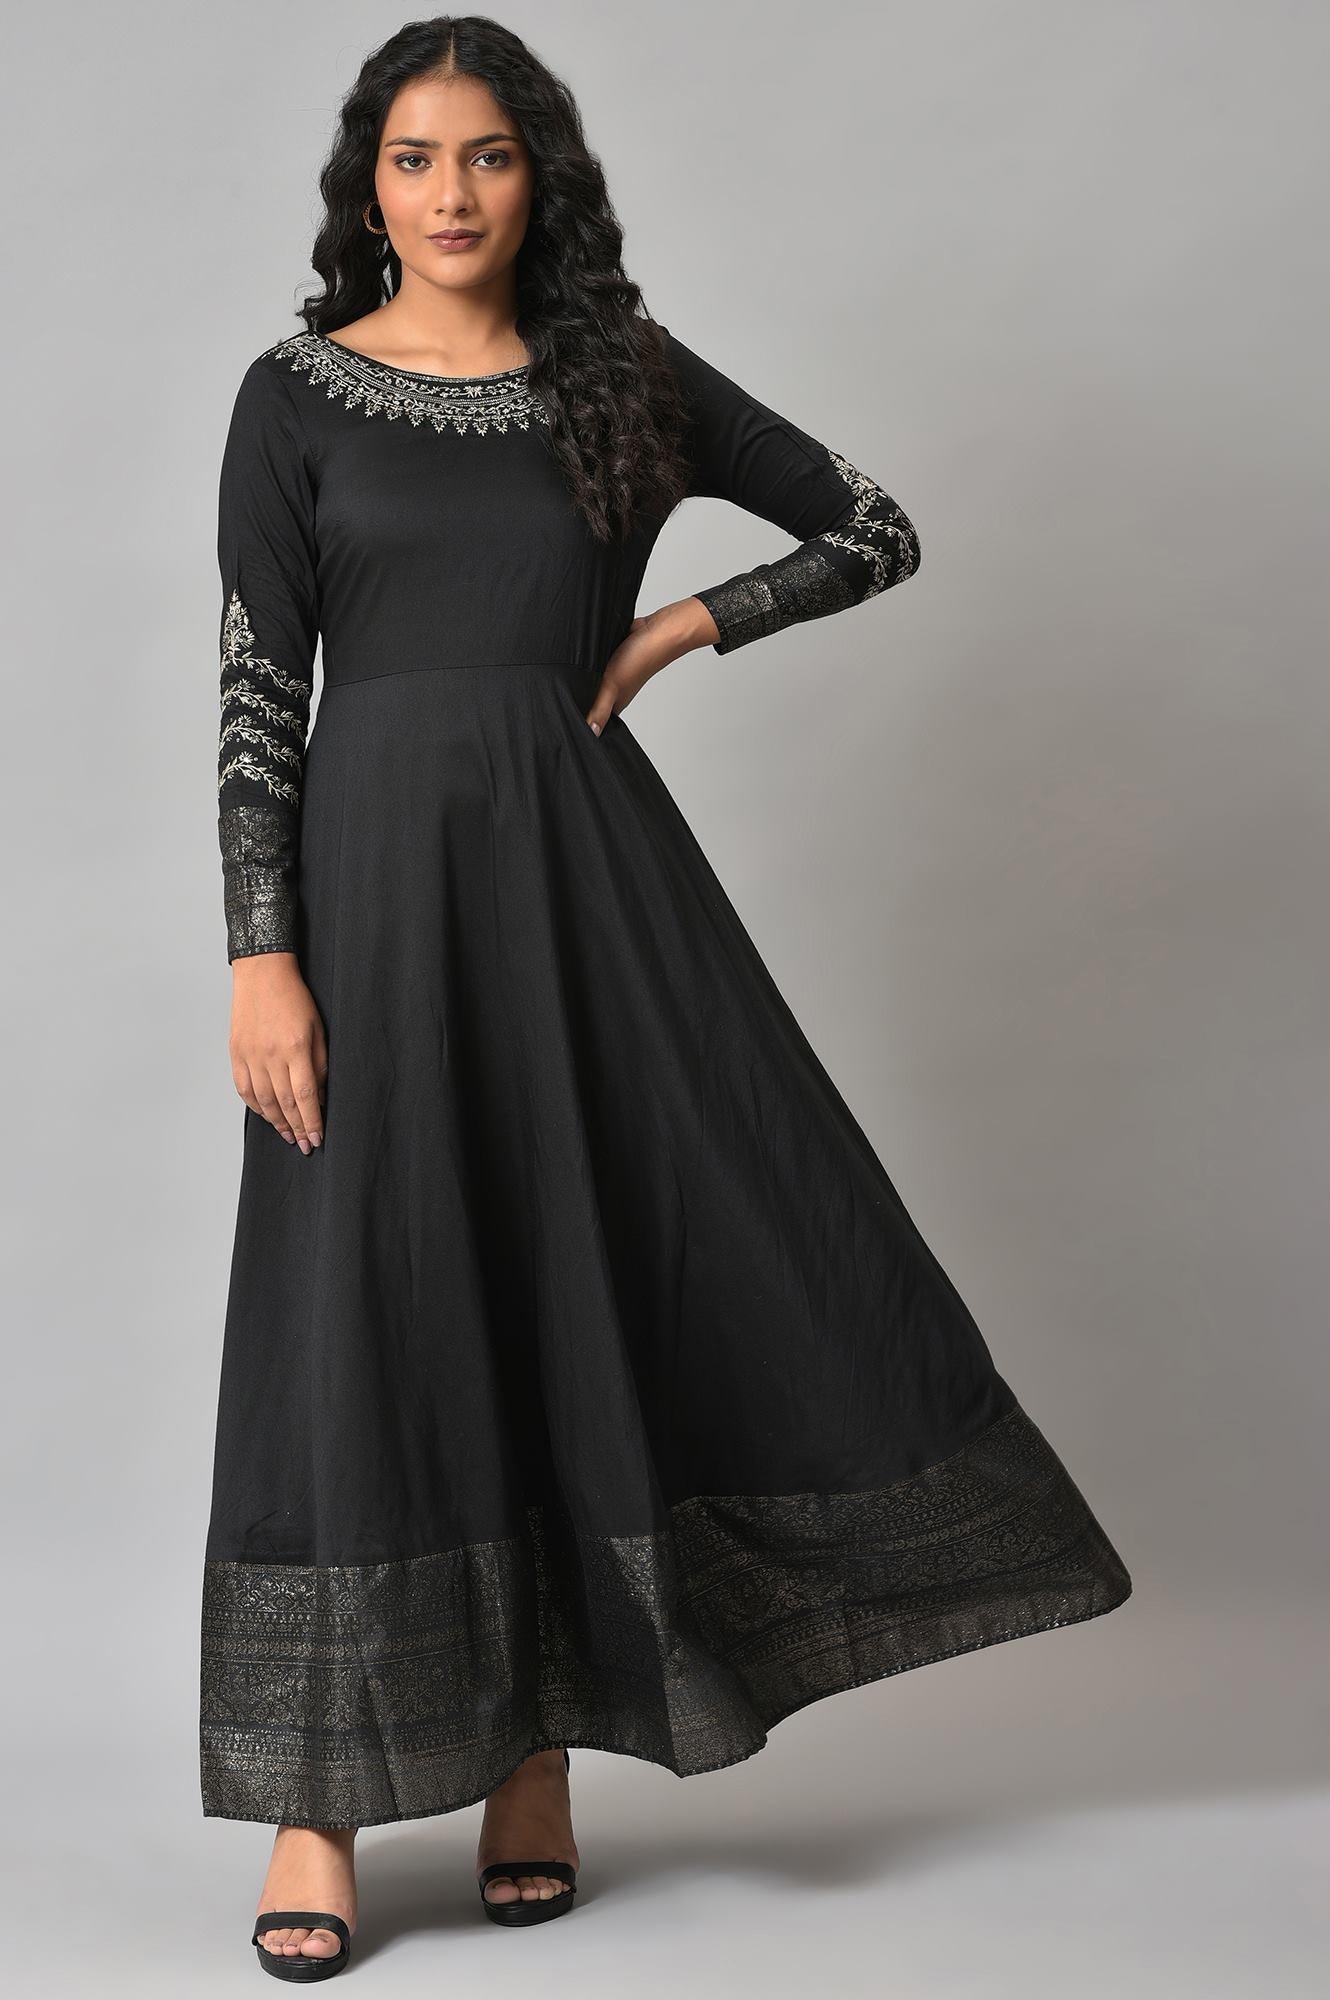 Black Glitter Printed And Embroidered Dress - wforwoman